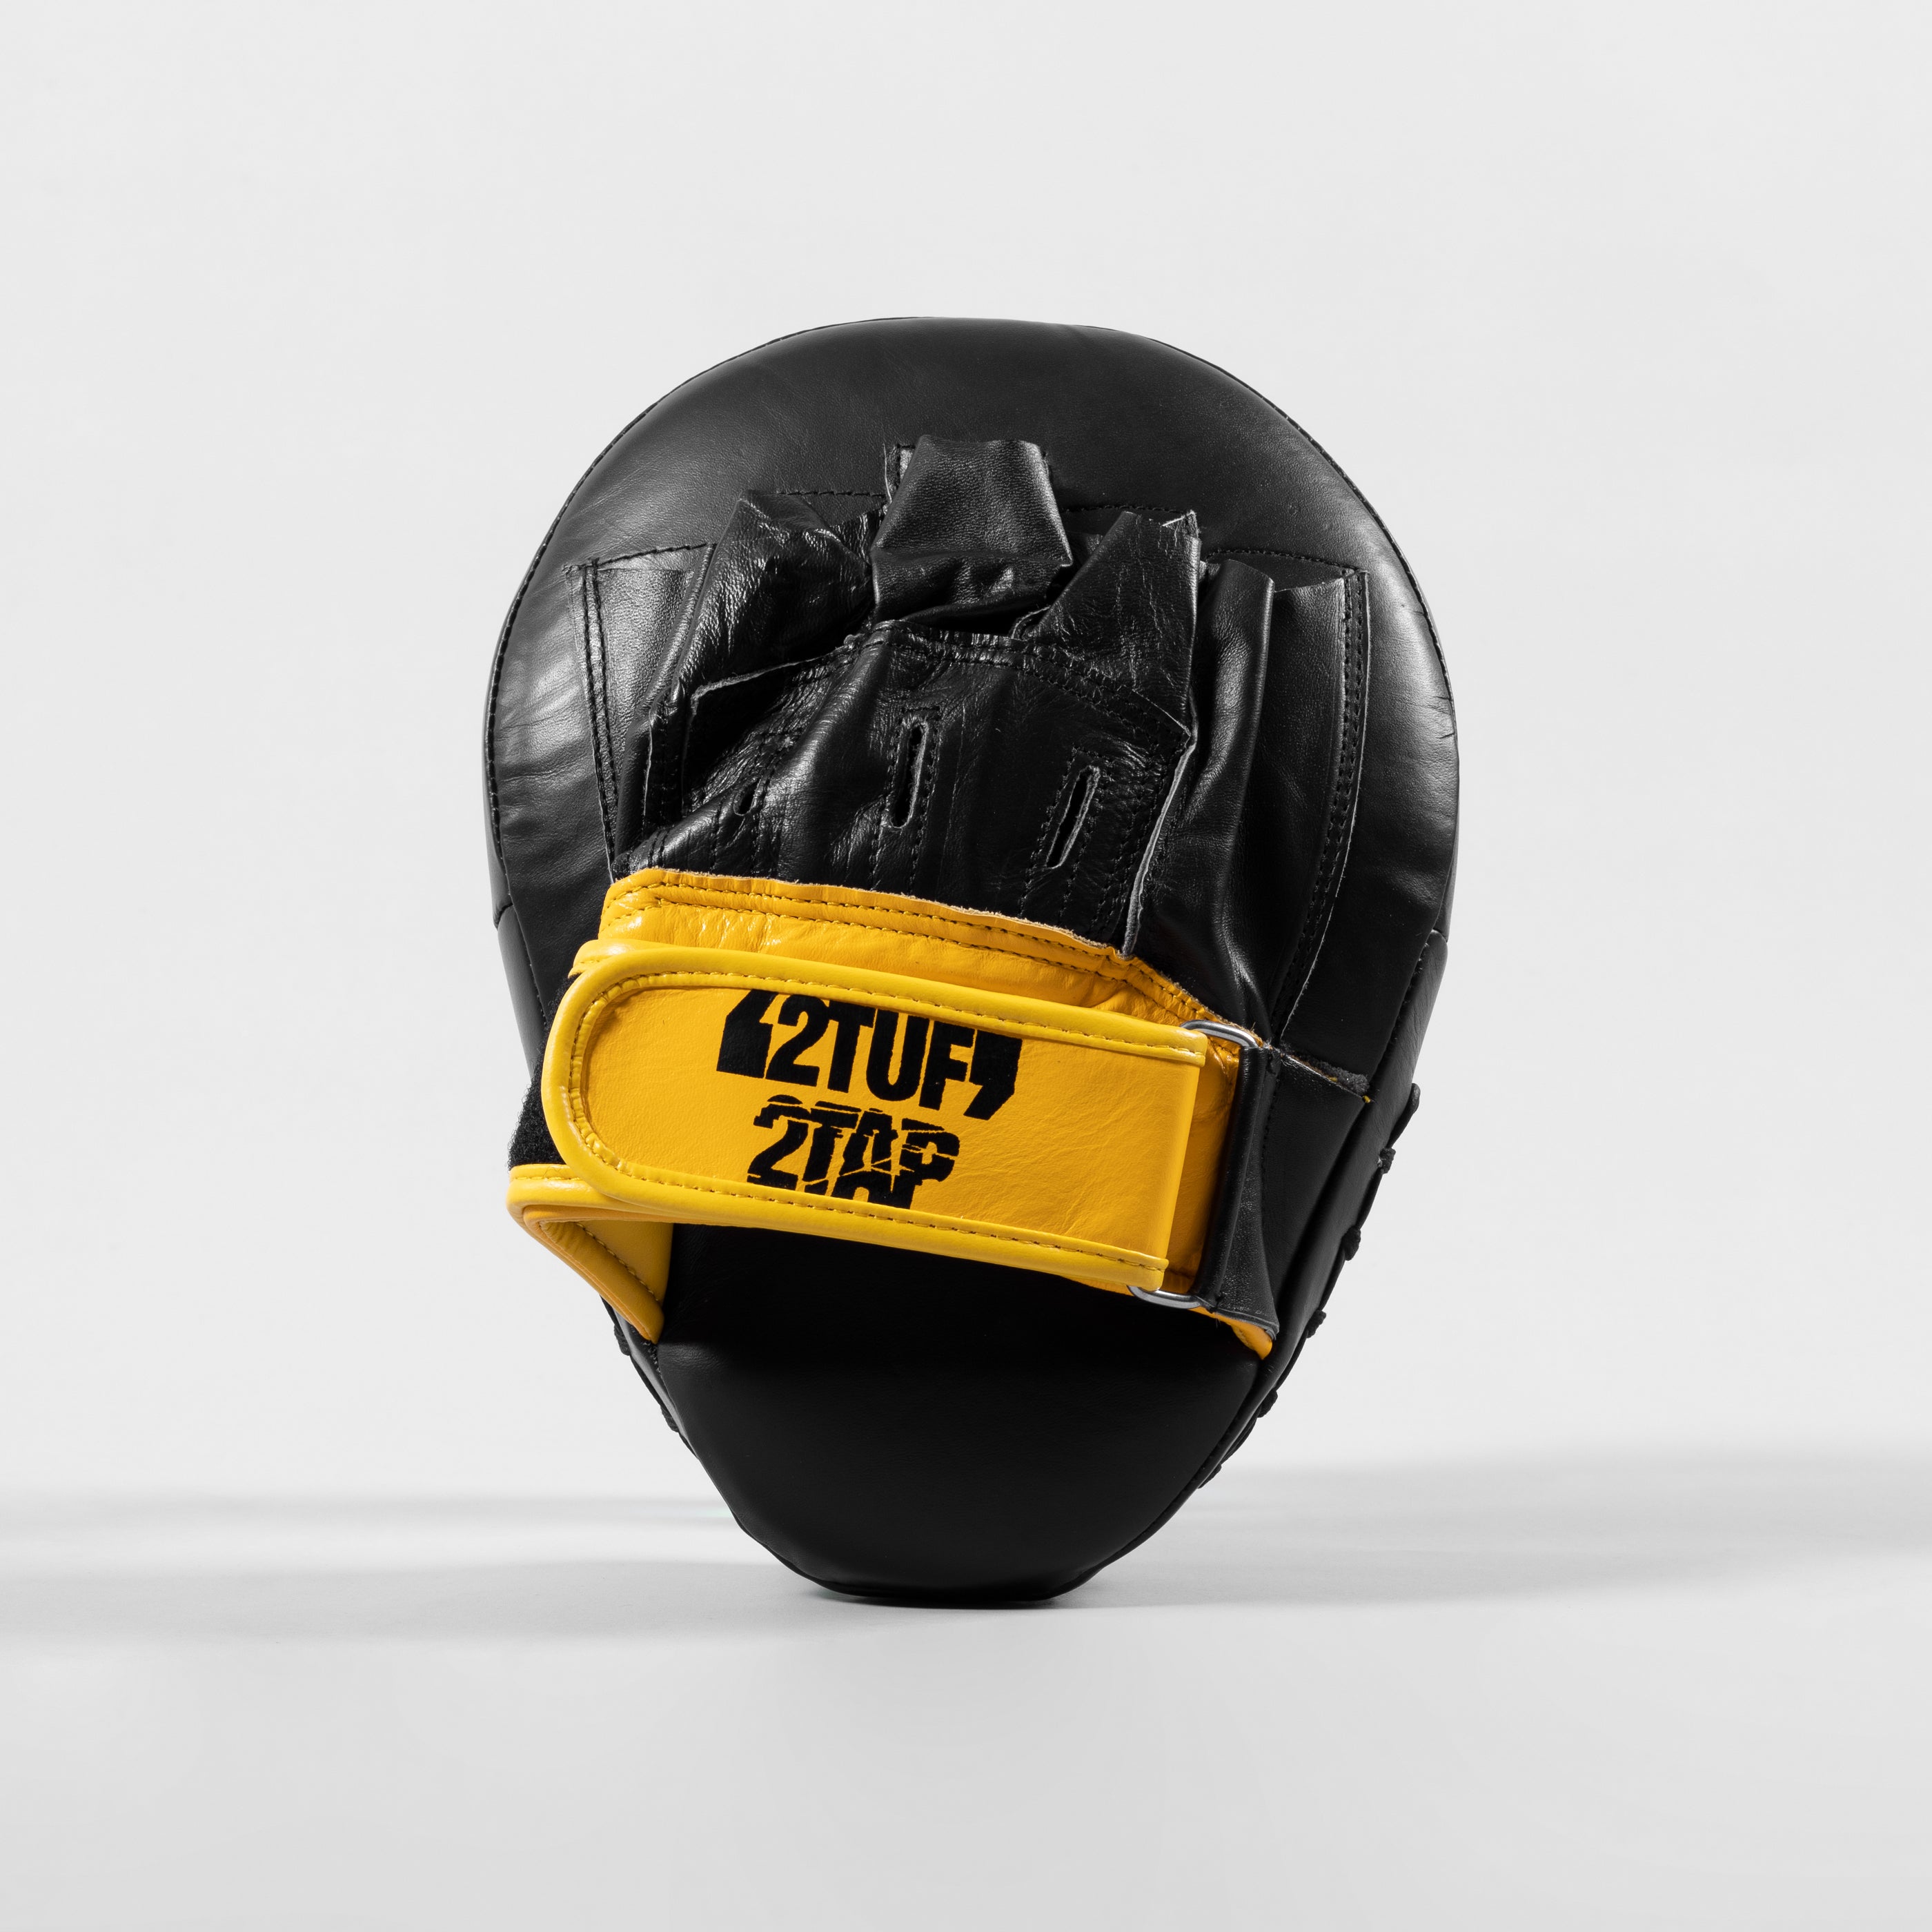 'Fracture' Focus Mitts - Genuine Leather - Black/Yellow 2TUF2TAP